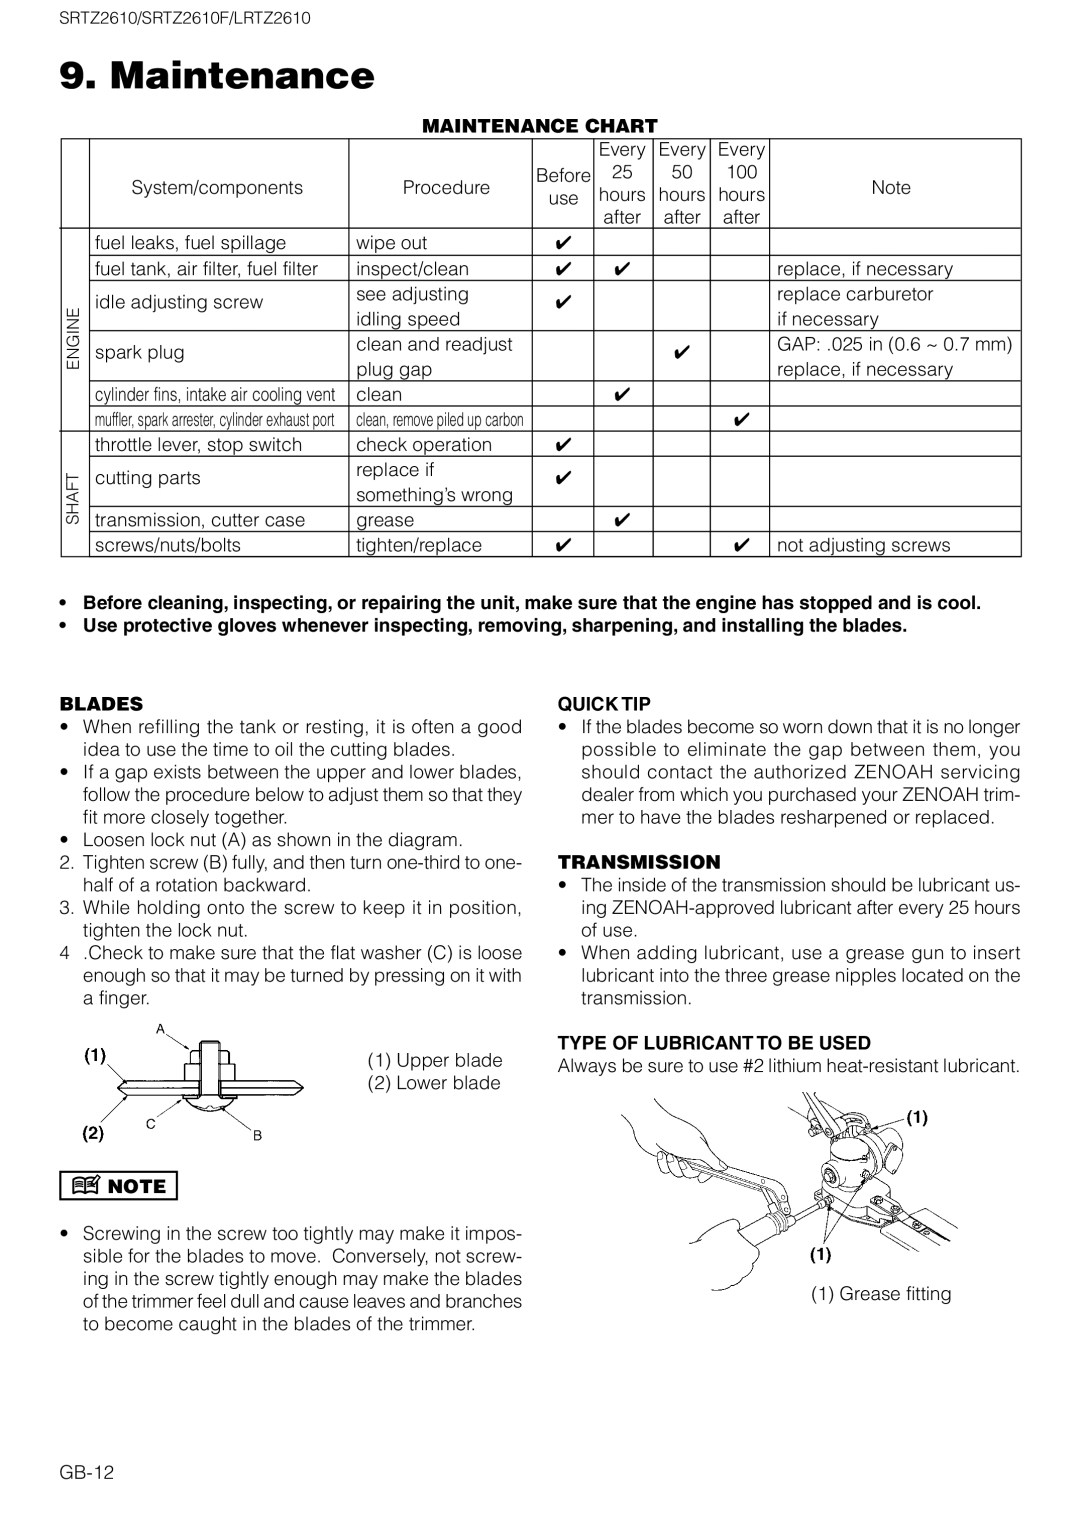 Zenoah SRTZ2610F, LRTZ2610 owner manual Maintenance Chart, Blades, Quick Tip, Transmission, Type Of Lubricant To Be Used 